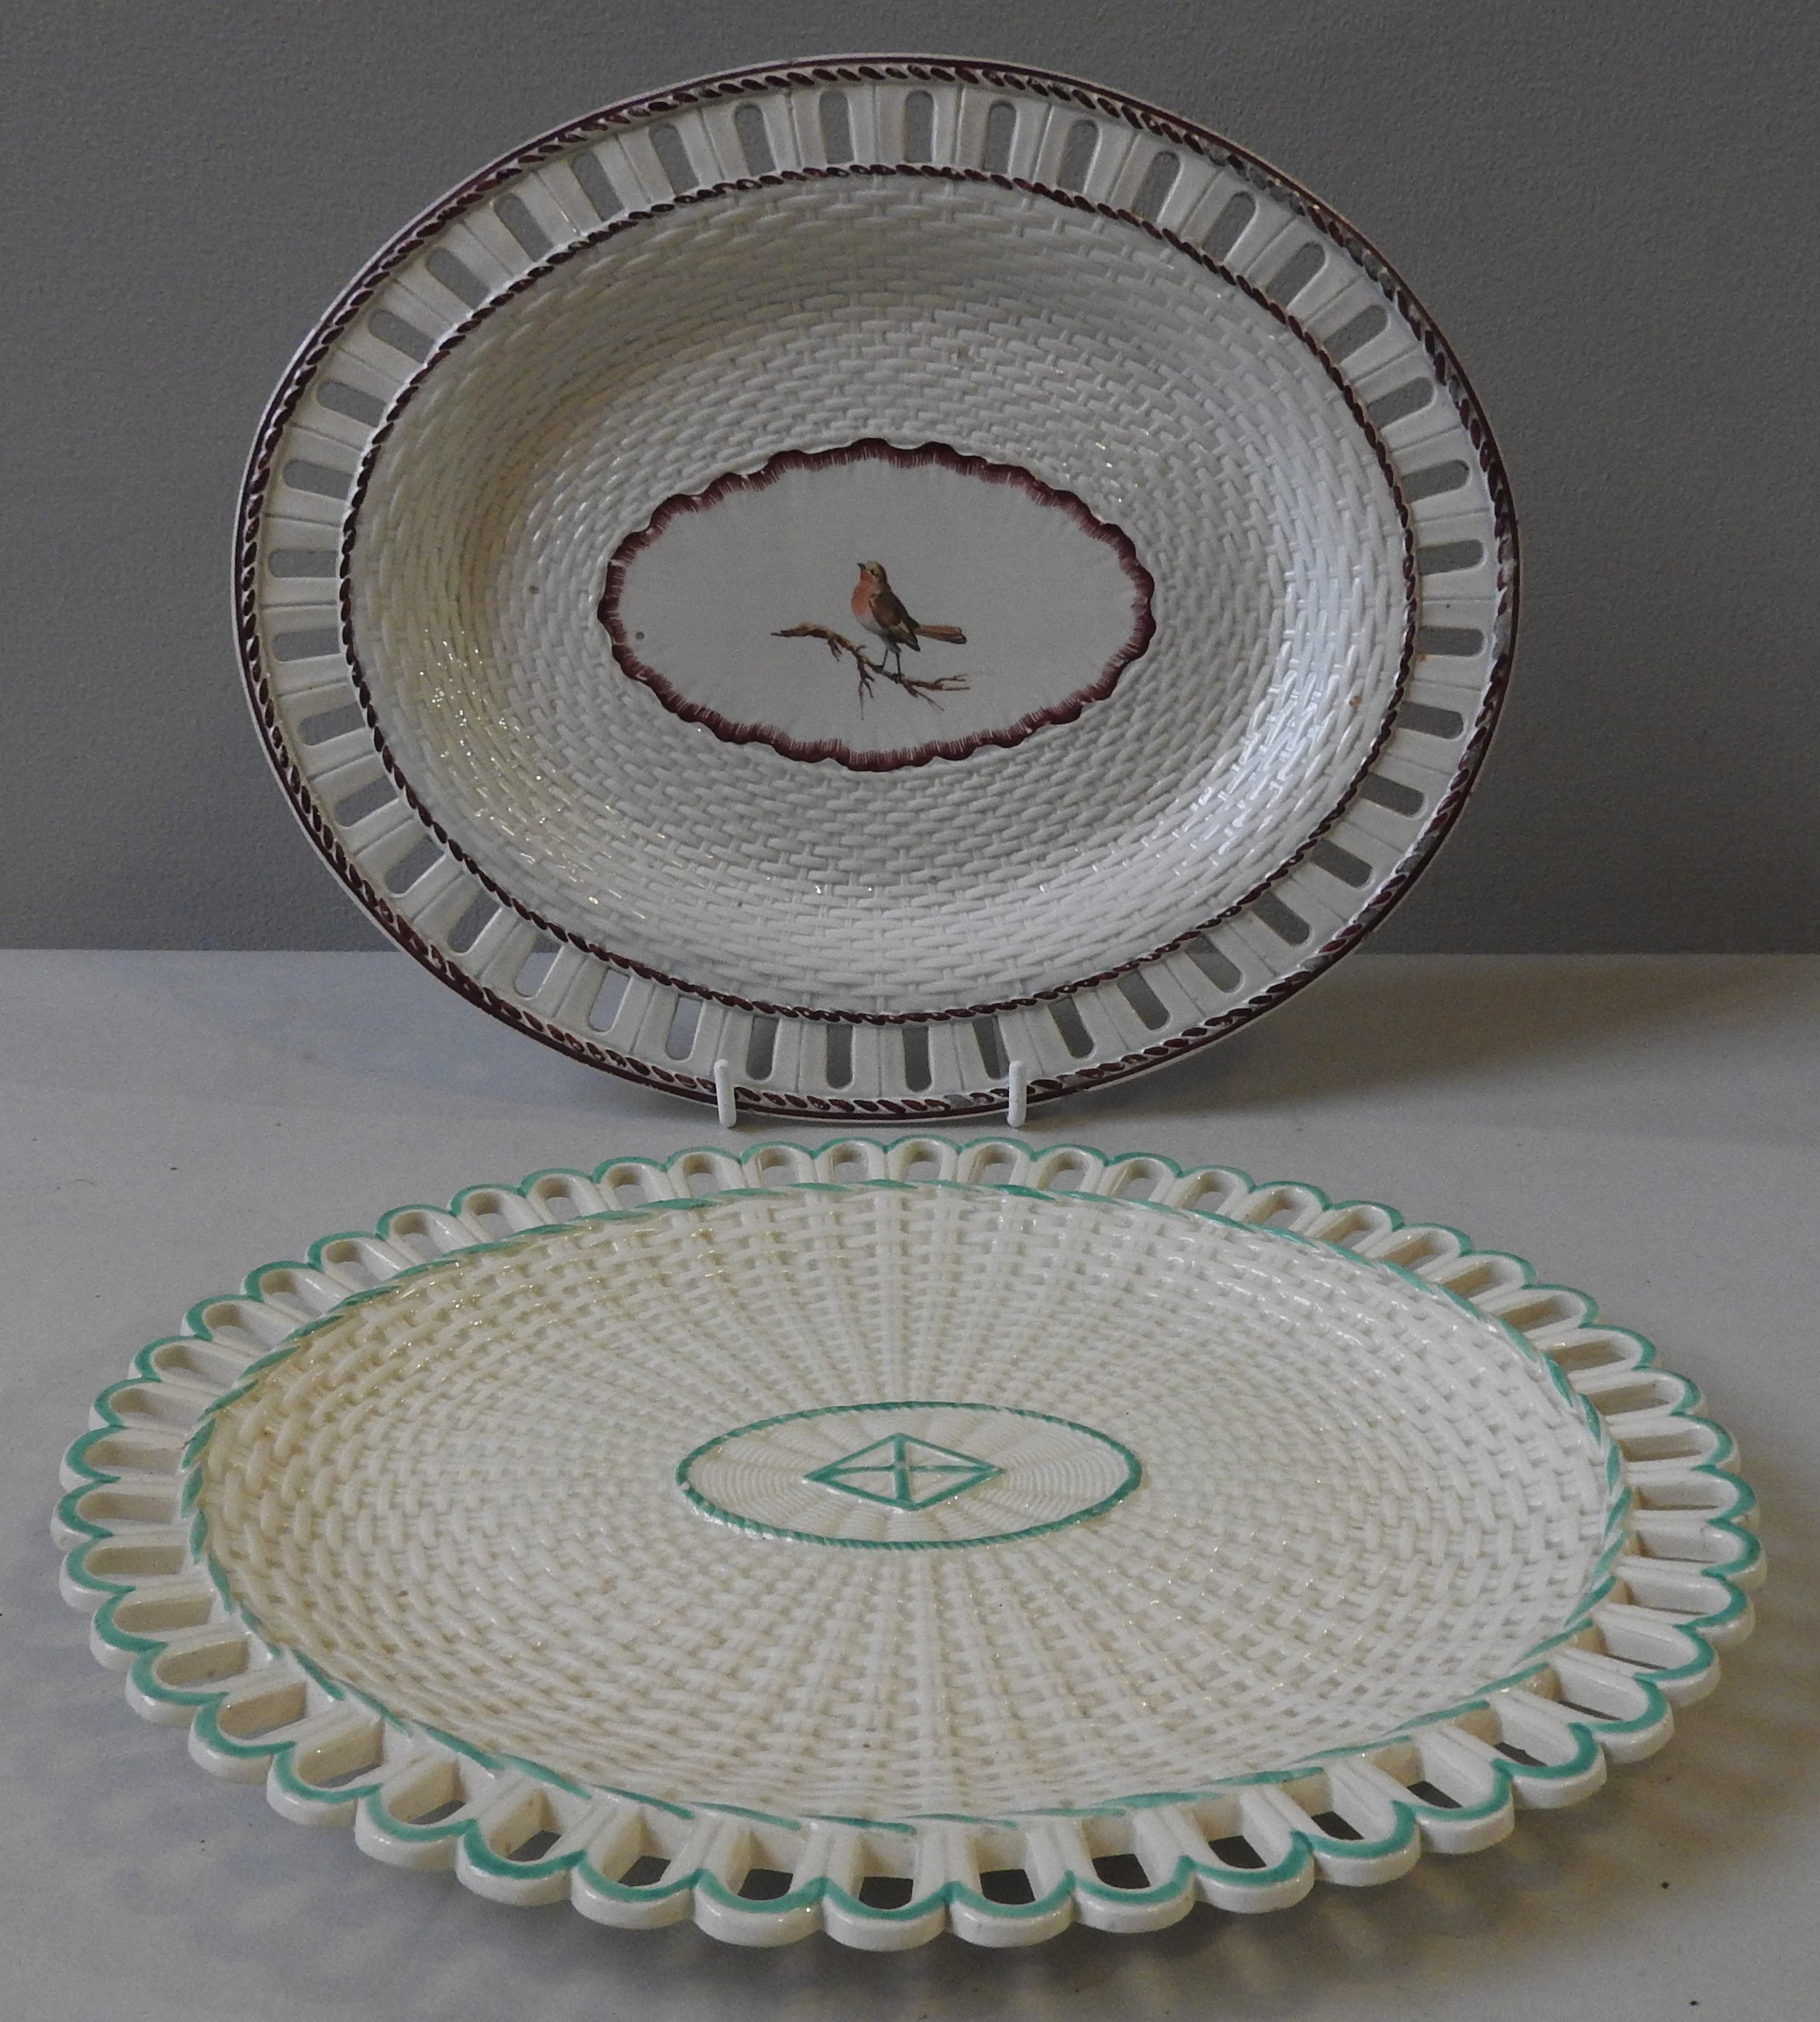 TWO RETICULATED CREAM WARE OVAL PLATTERS, EARLY 19TH CENTURY, one Wedgwood example with basket weave